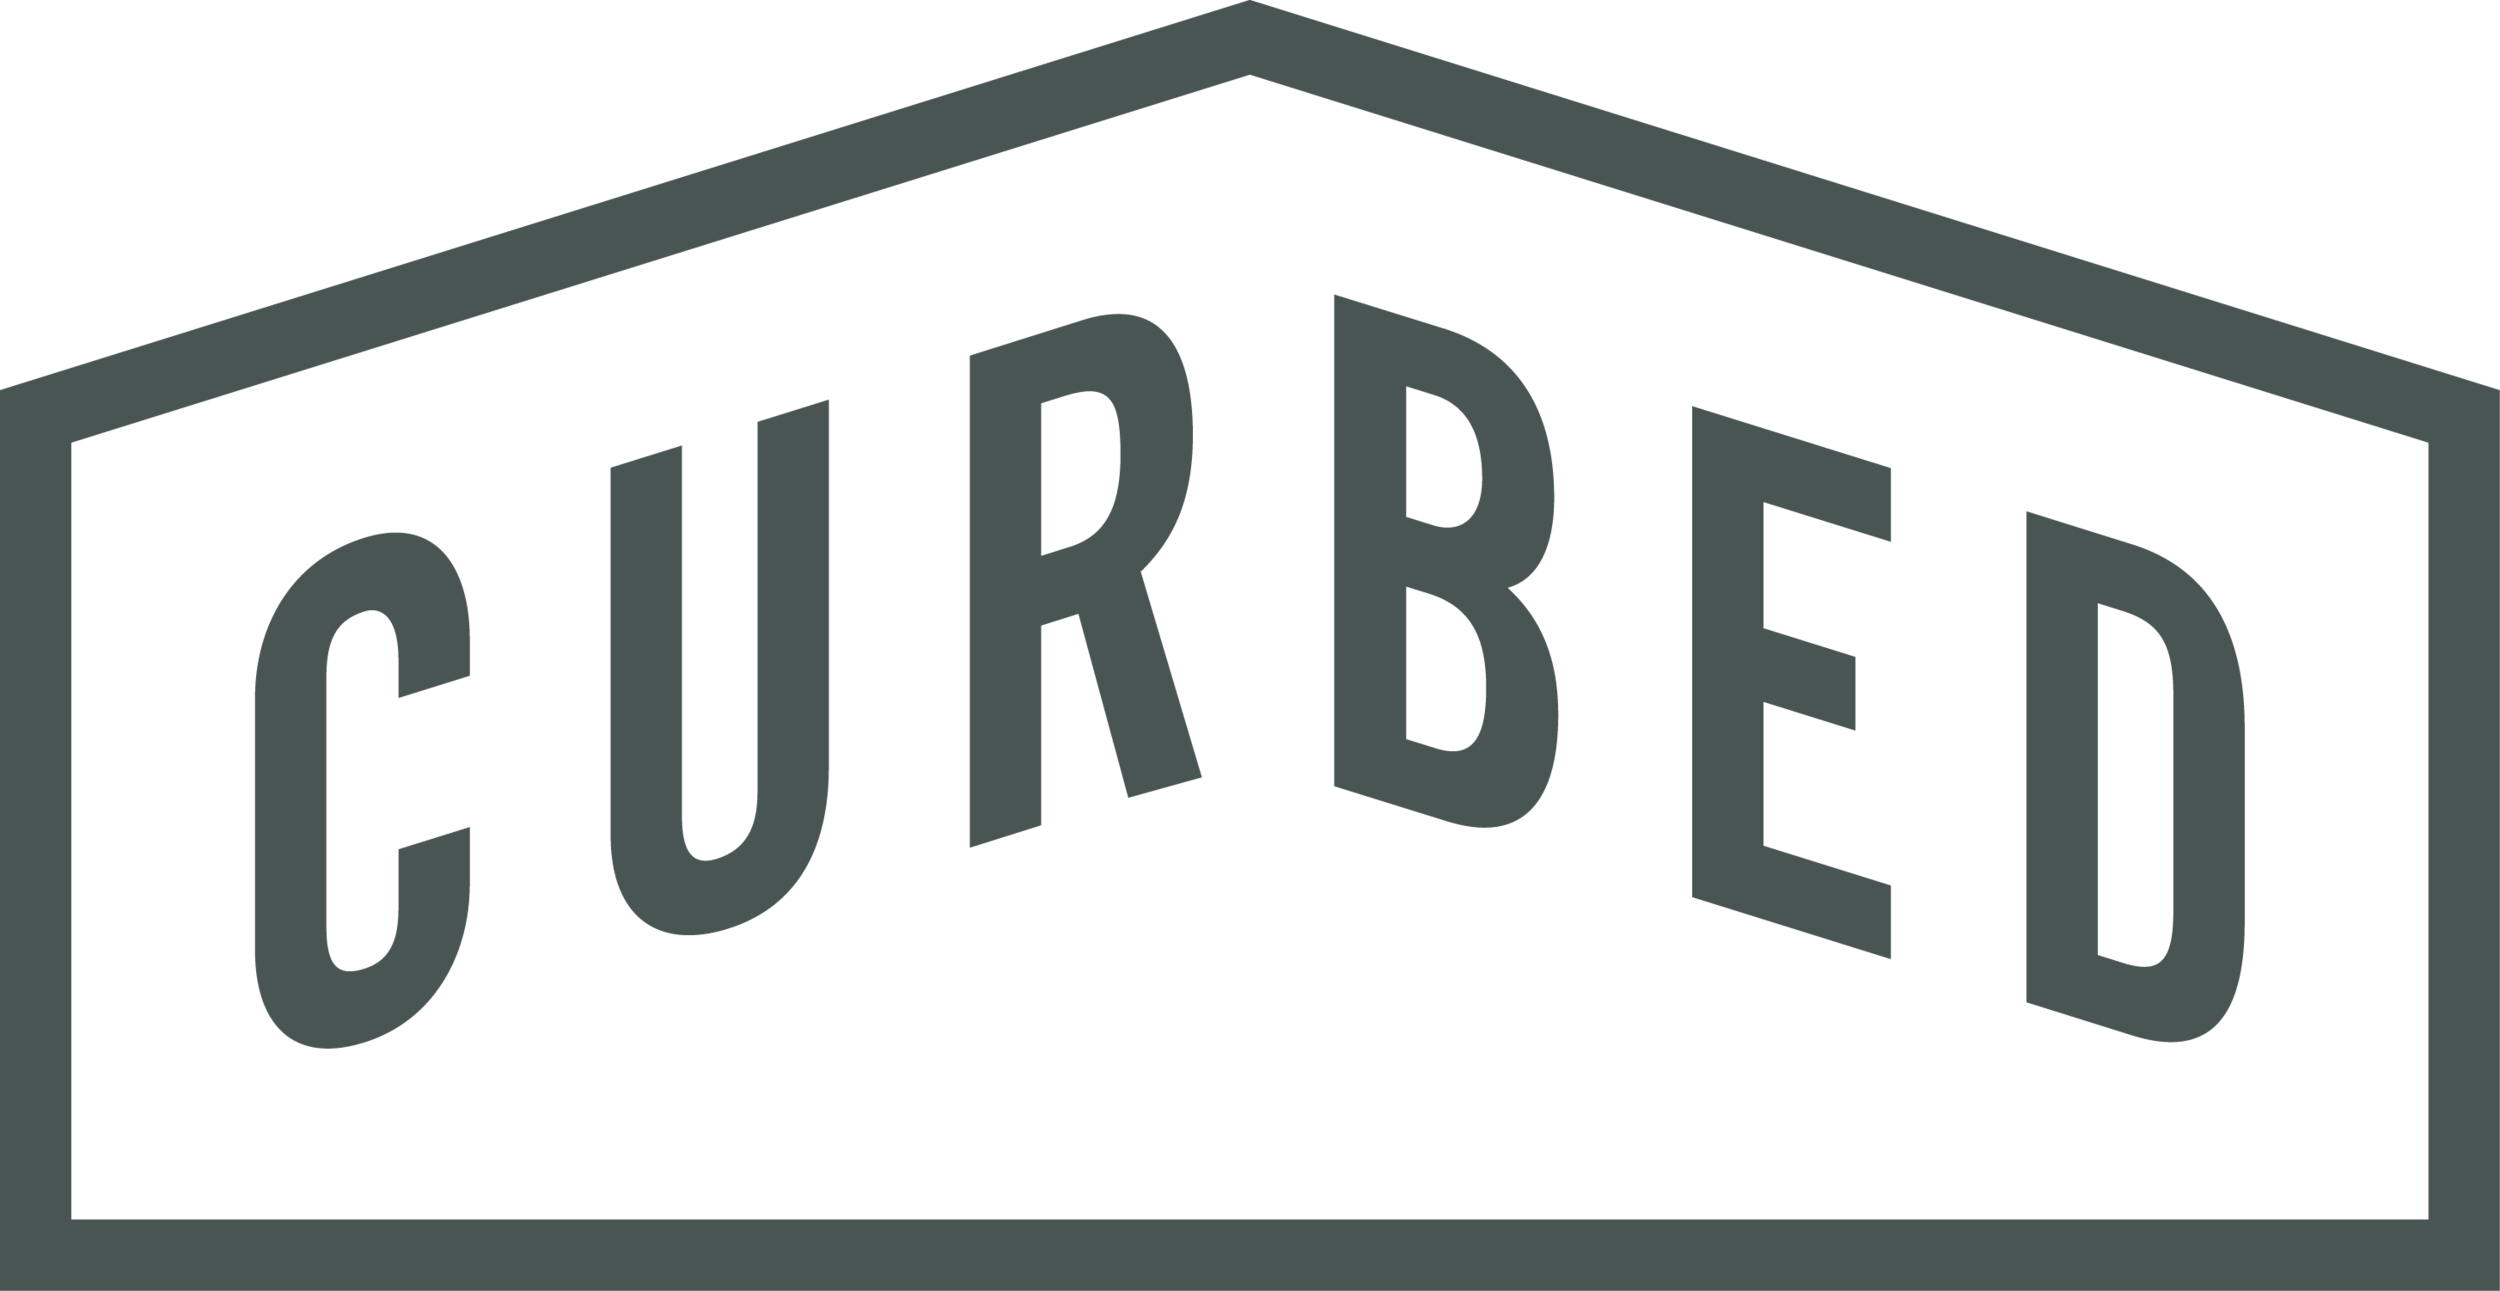 curbed-logo-slate_0.png